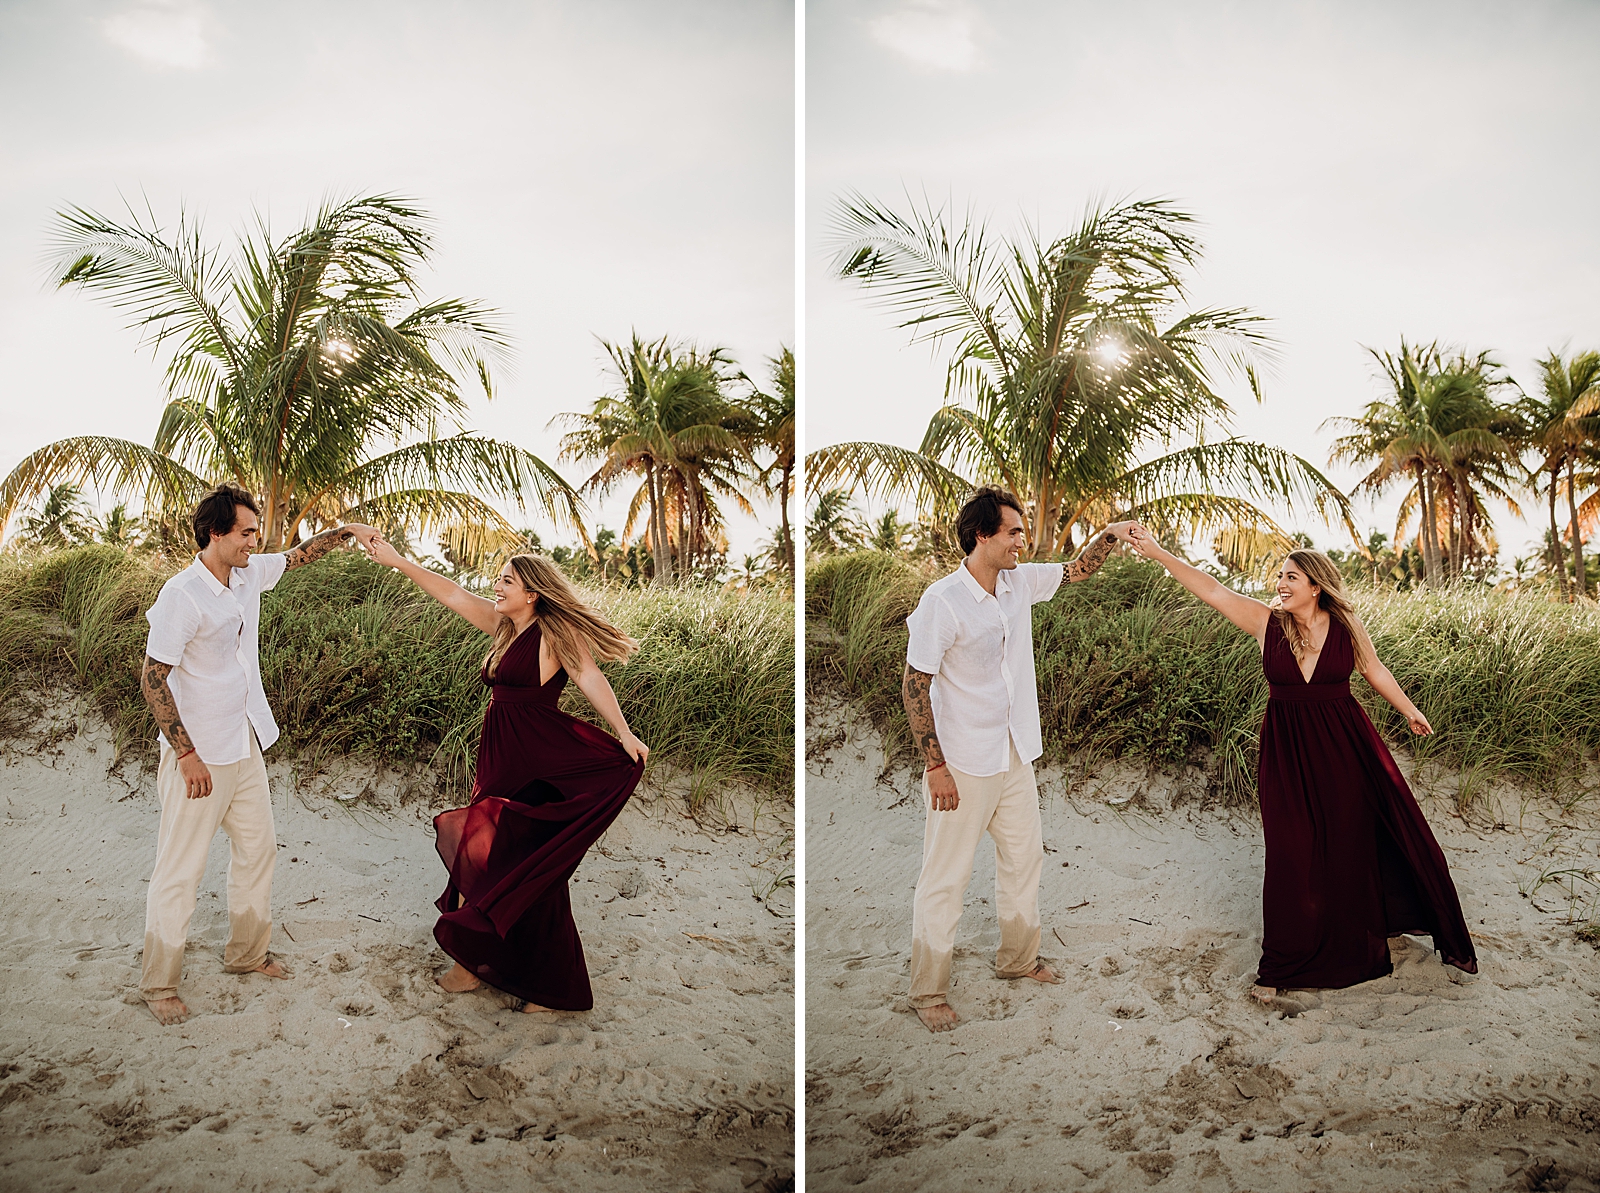 Couple pirouetting on the sand Key Biscayne Beach Engagement Photography captured by South Florida Family Photographer Maggie Alvarez Photography